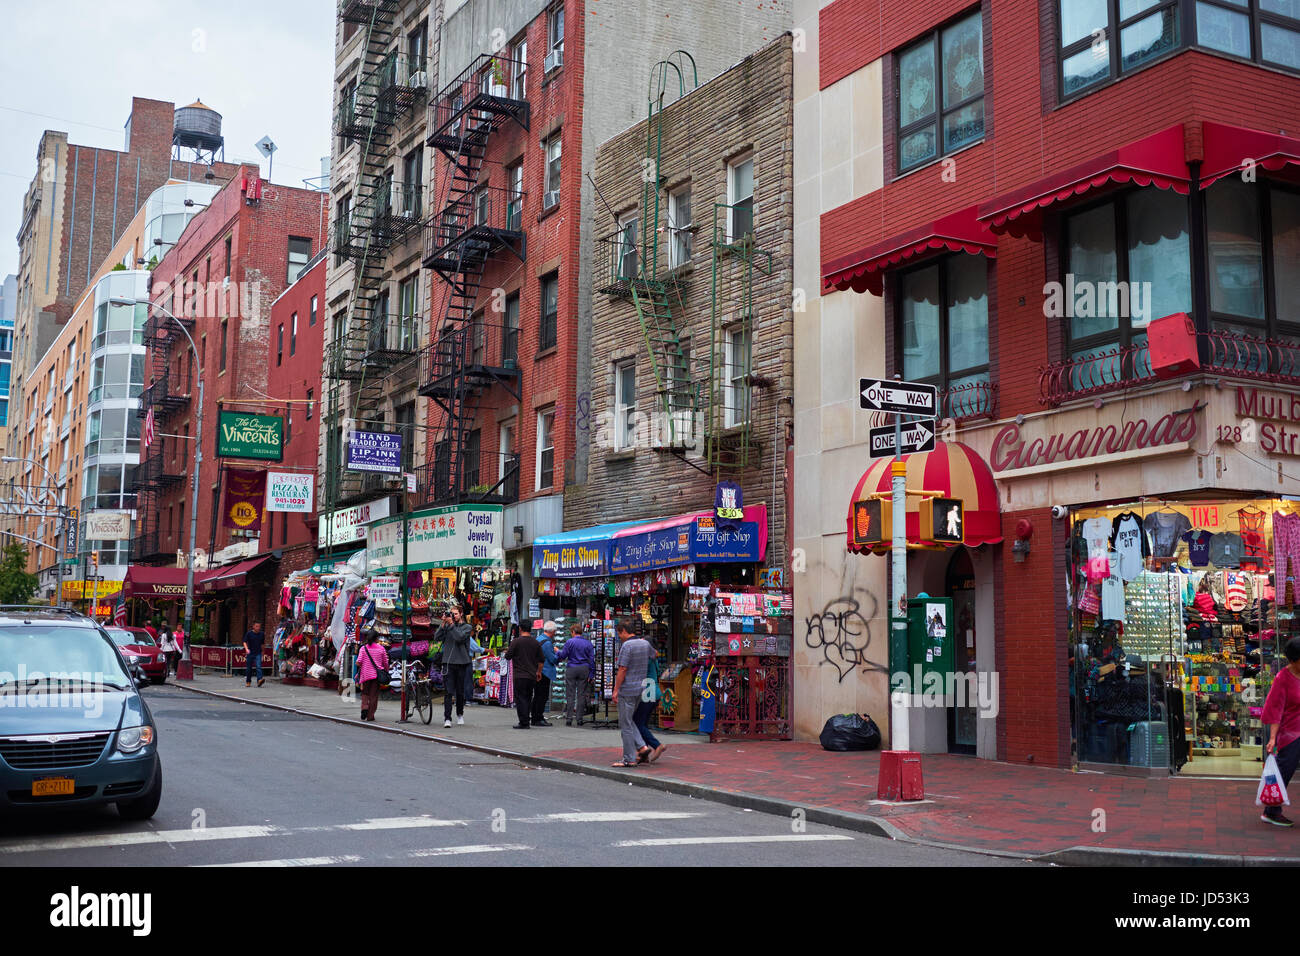 NEW YORK CITY - OCTOBER 15, 2014: Street level view of apartments and shops, corner of Mulberry St and Hester St in Chinatown Stock Photo